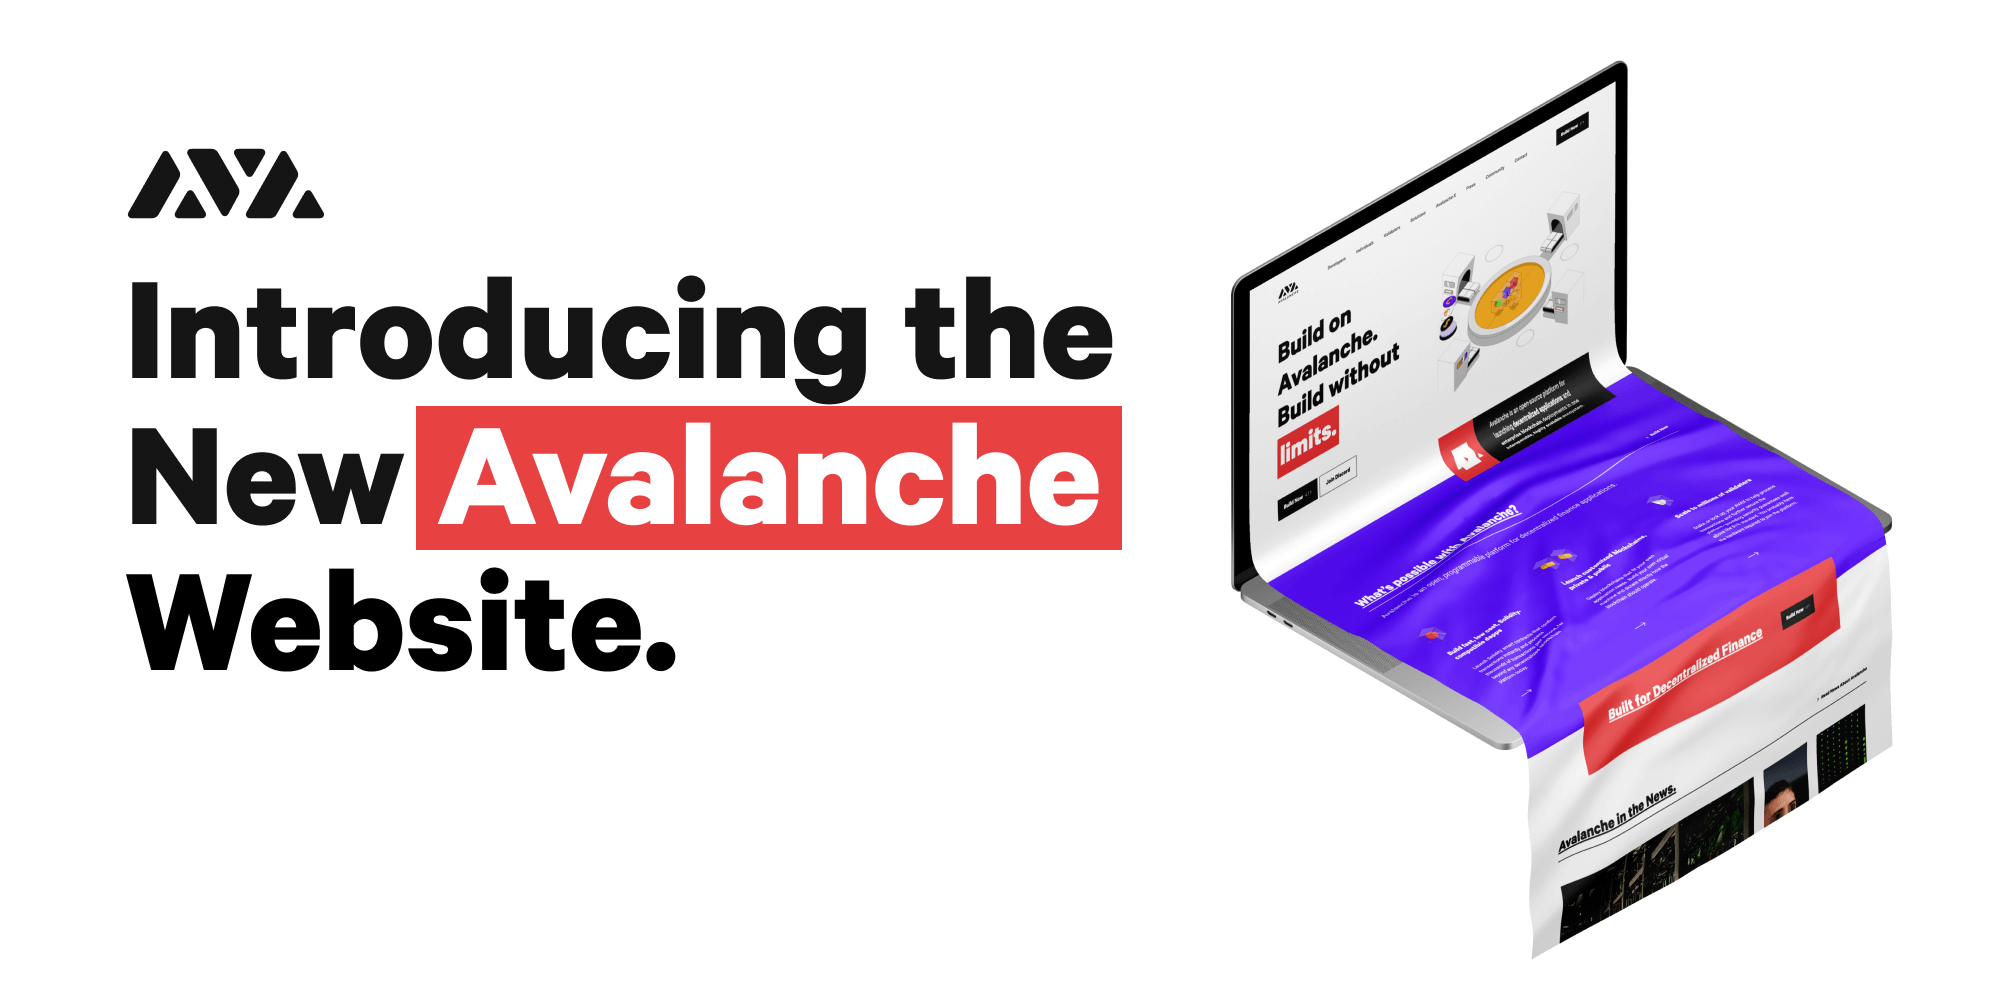 Introducing the New Avalanche Website